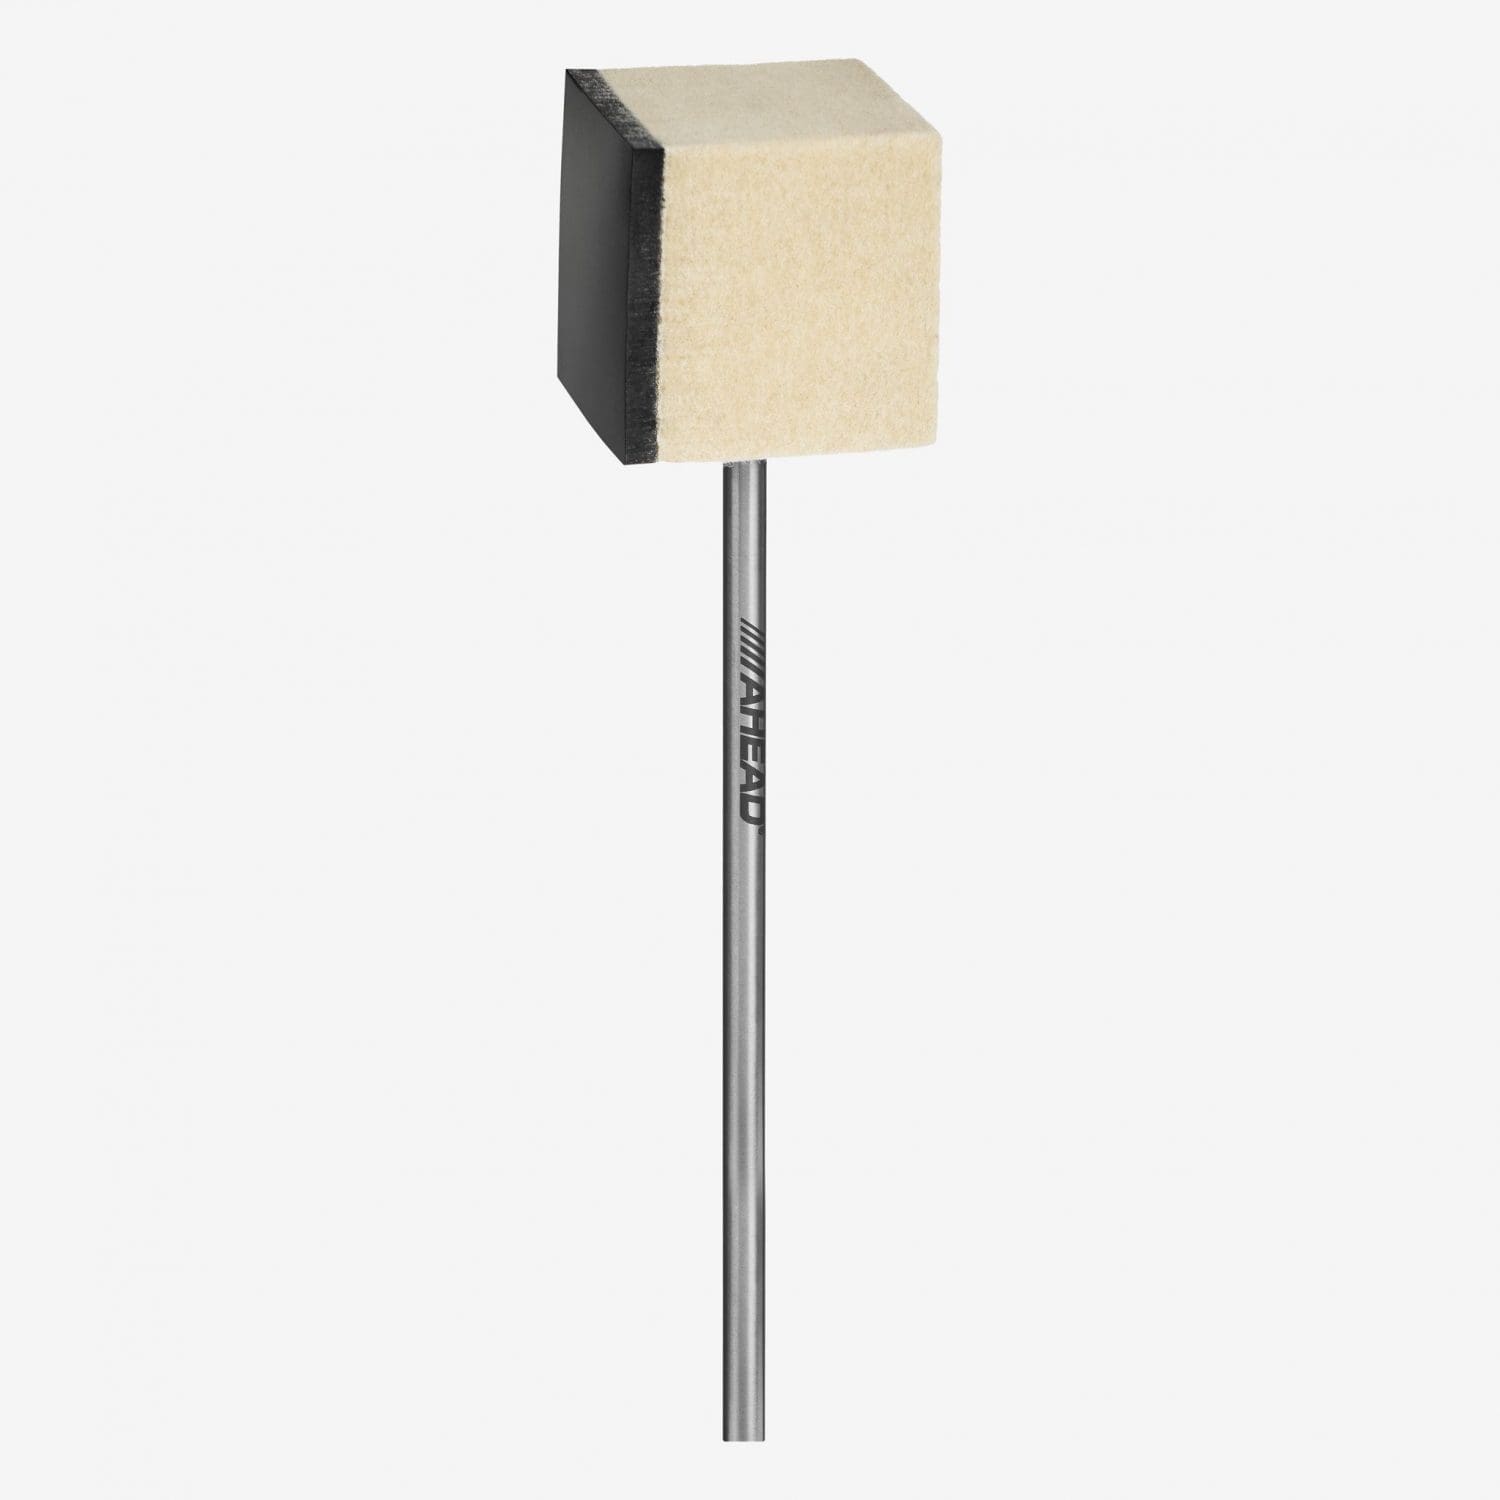 Two-Way Rubber Cube Felt Beater